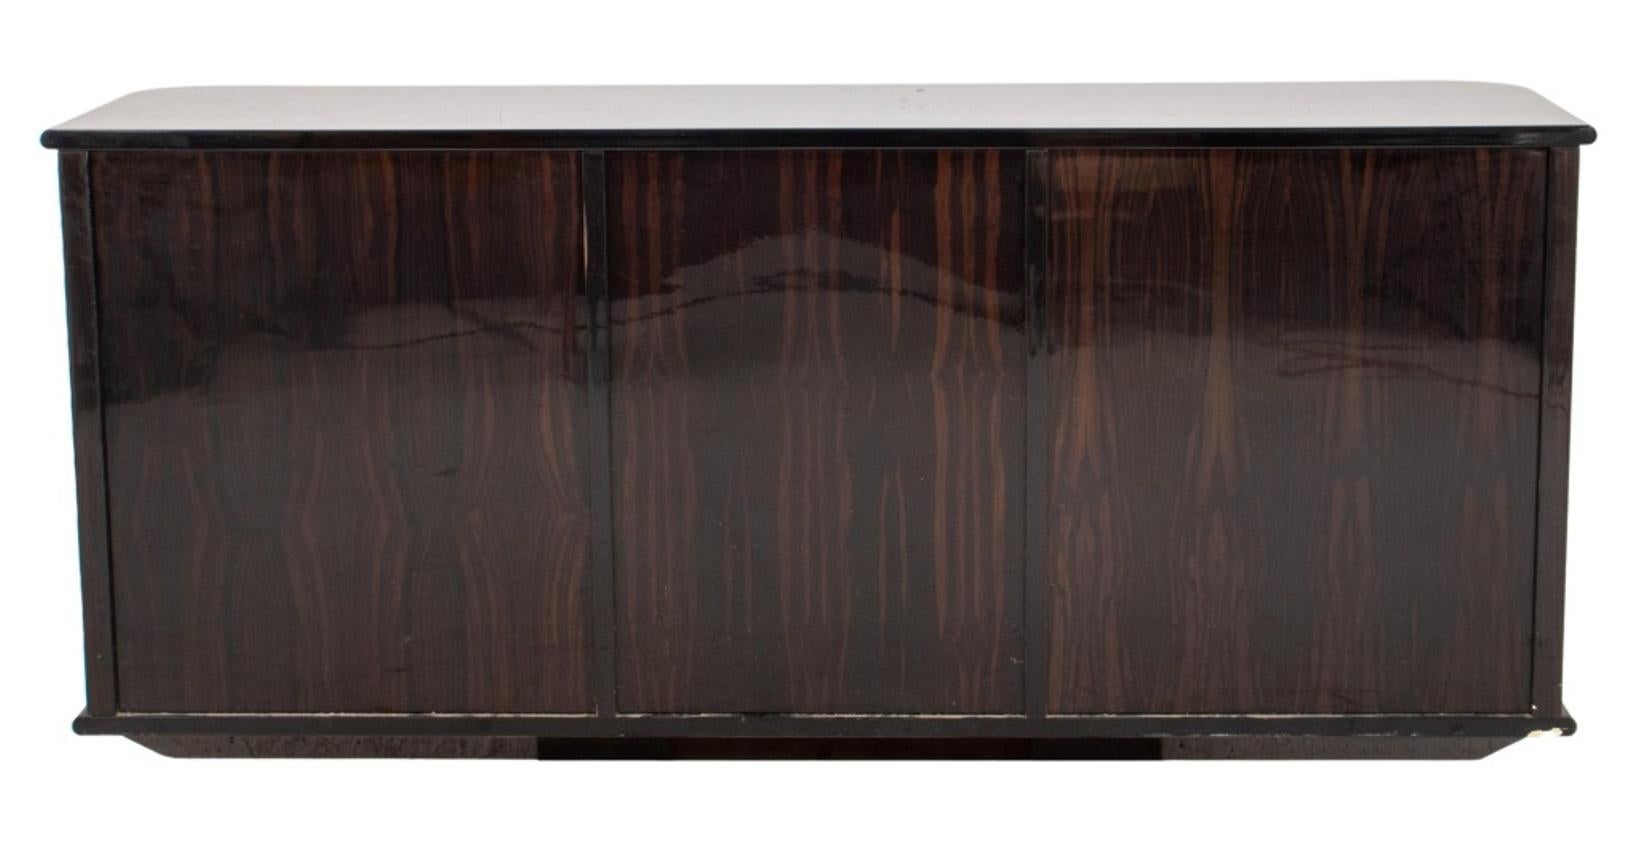 Italian lacquered Faux Rosewood Credenza, with rectangular top with rounded corners, above a conforming corps wit reeded quoins, and centering four short drawers between two cabinet doors opening to reveal shelves, on a pling, finished in the